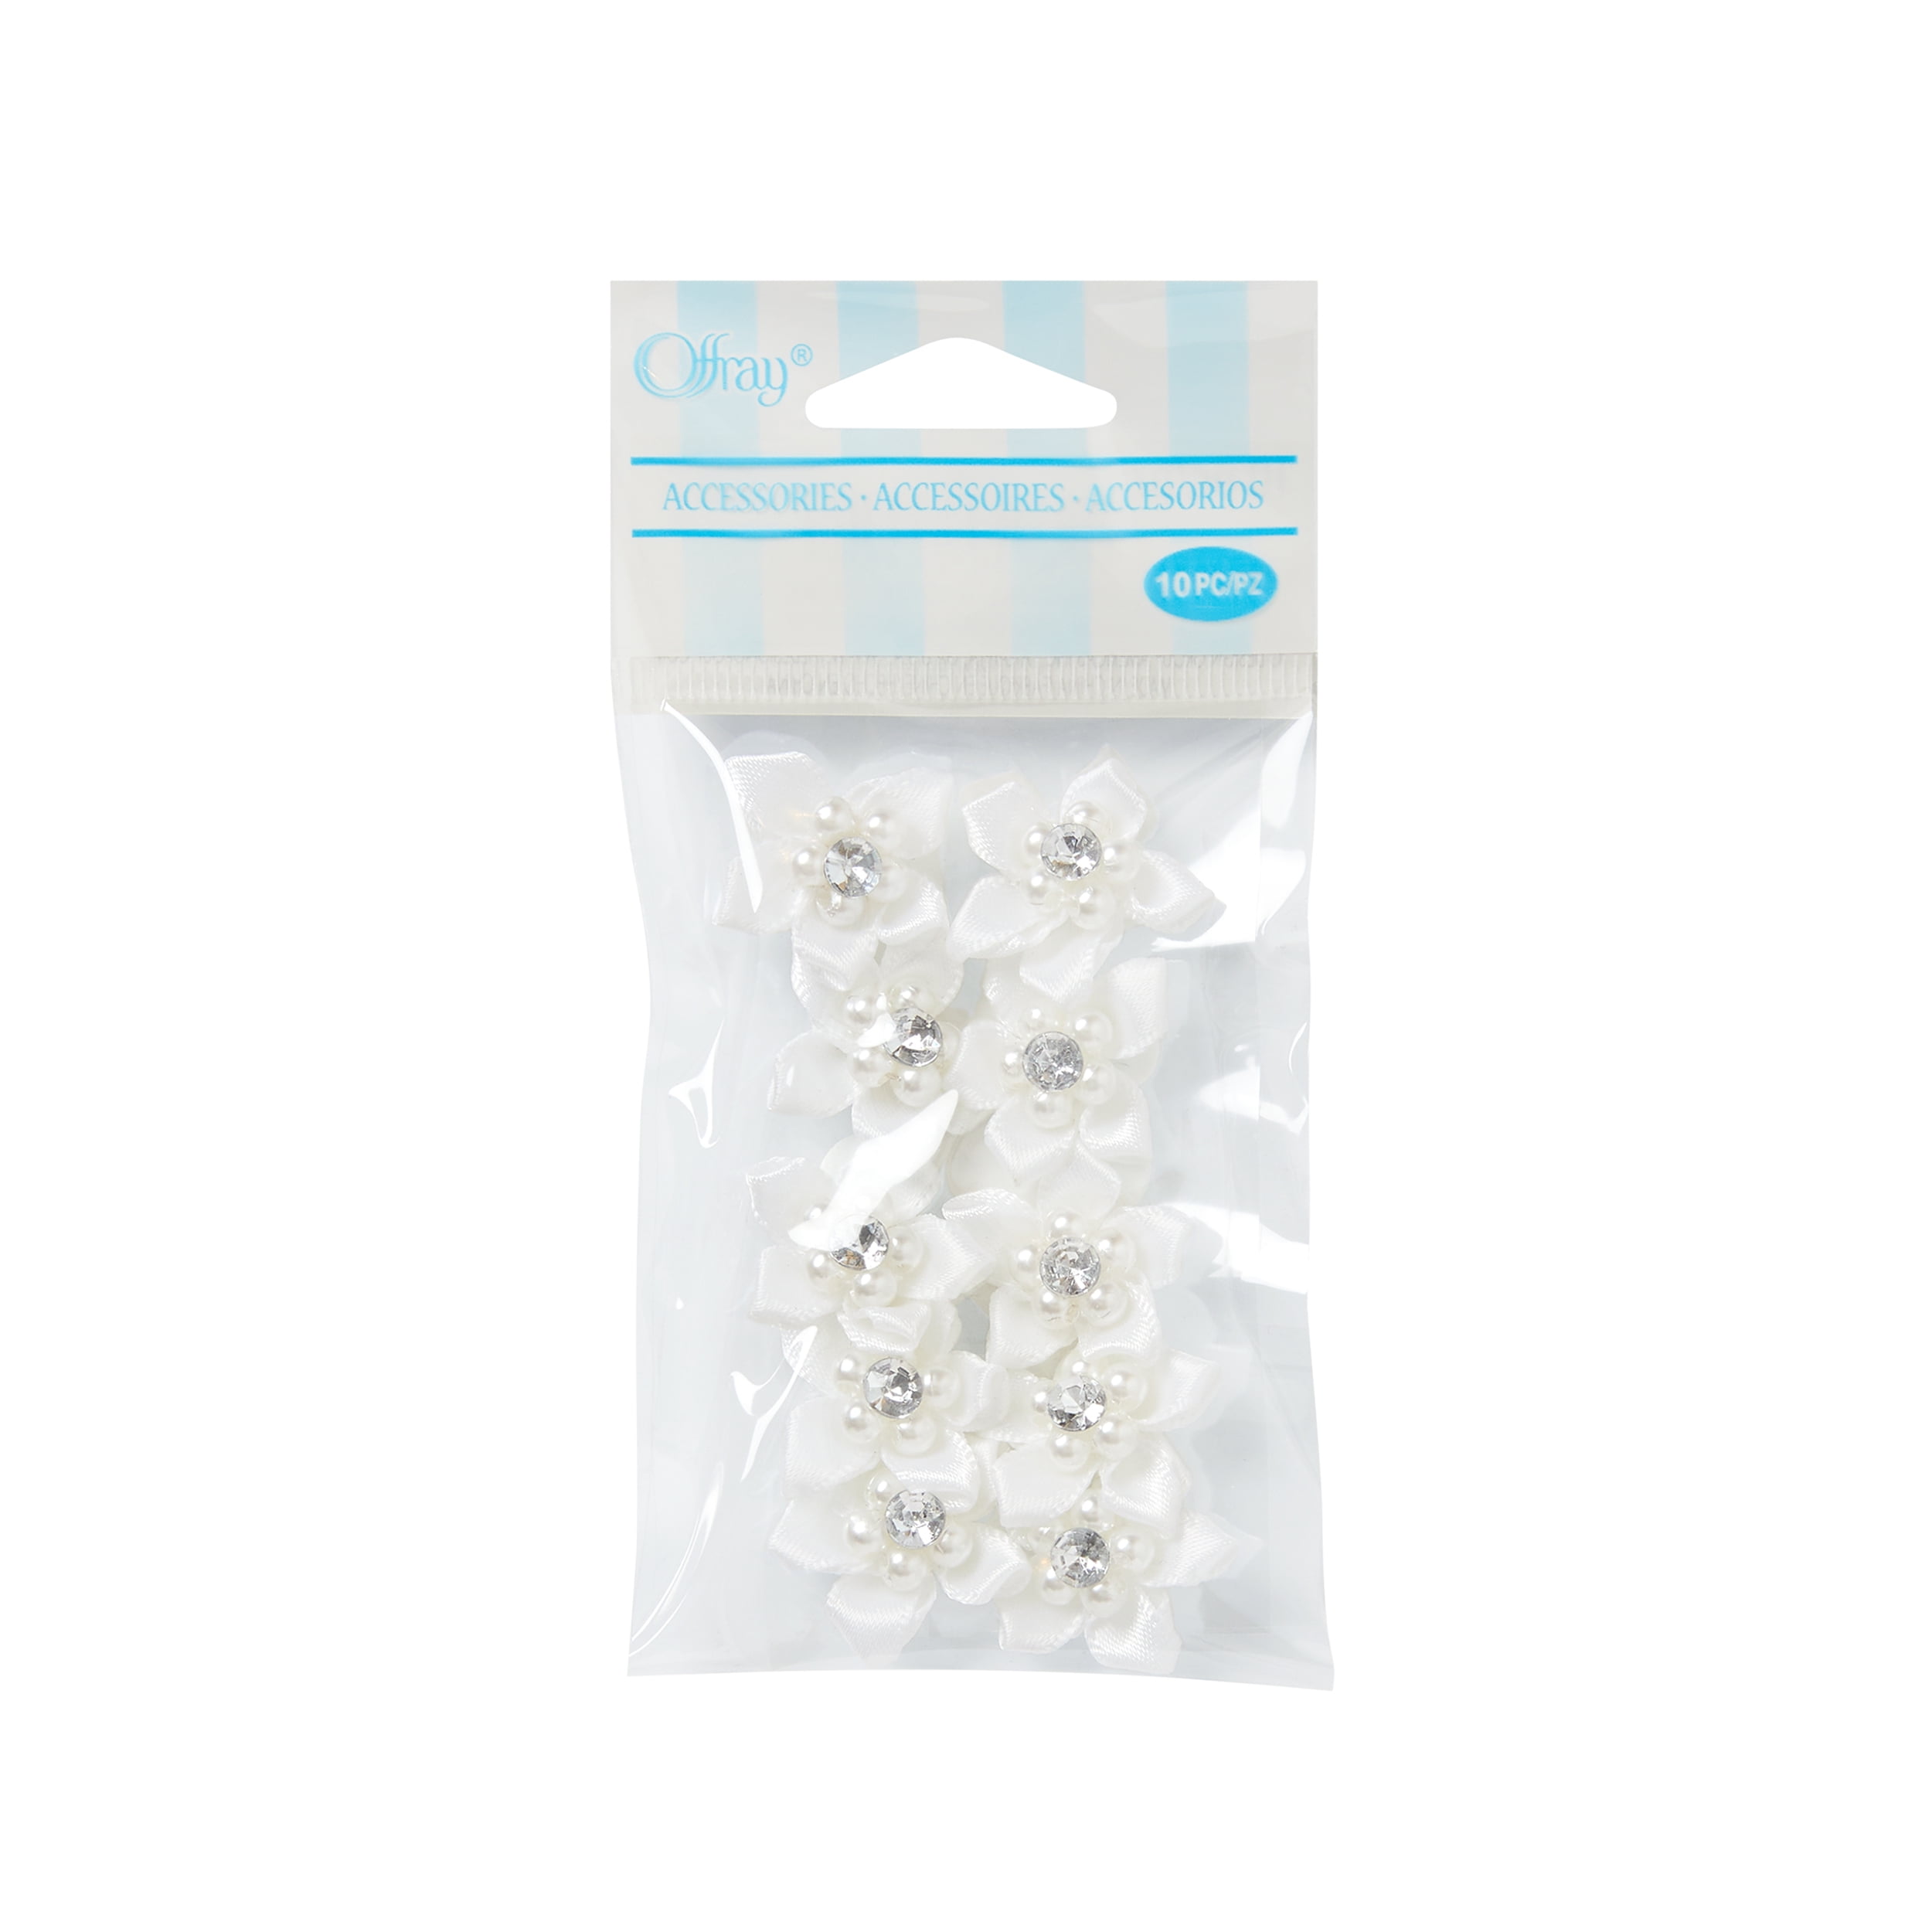 Offray Accessories, White 3/4 inch Value Pack 5 Petal Gem Flower Accessory for Wedding, Hair Clips, and Scrapbooking, 10 count, 1 Package